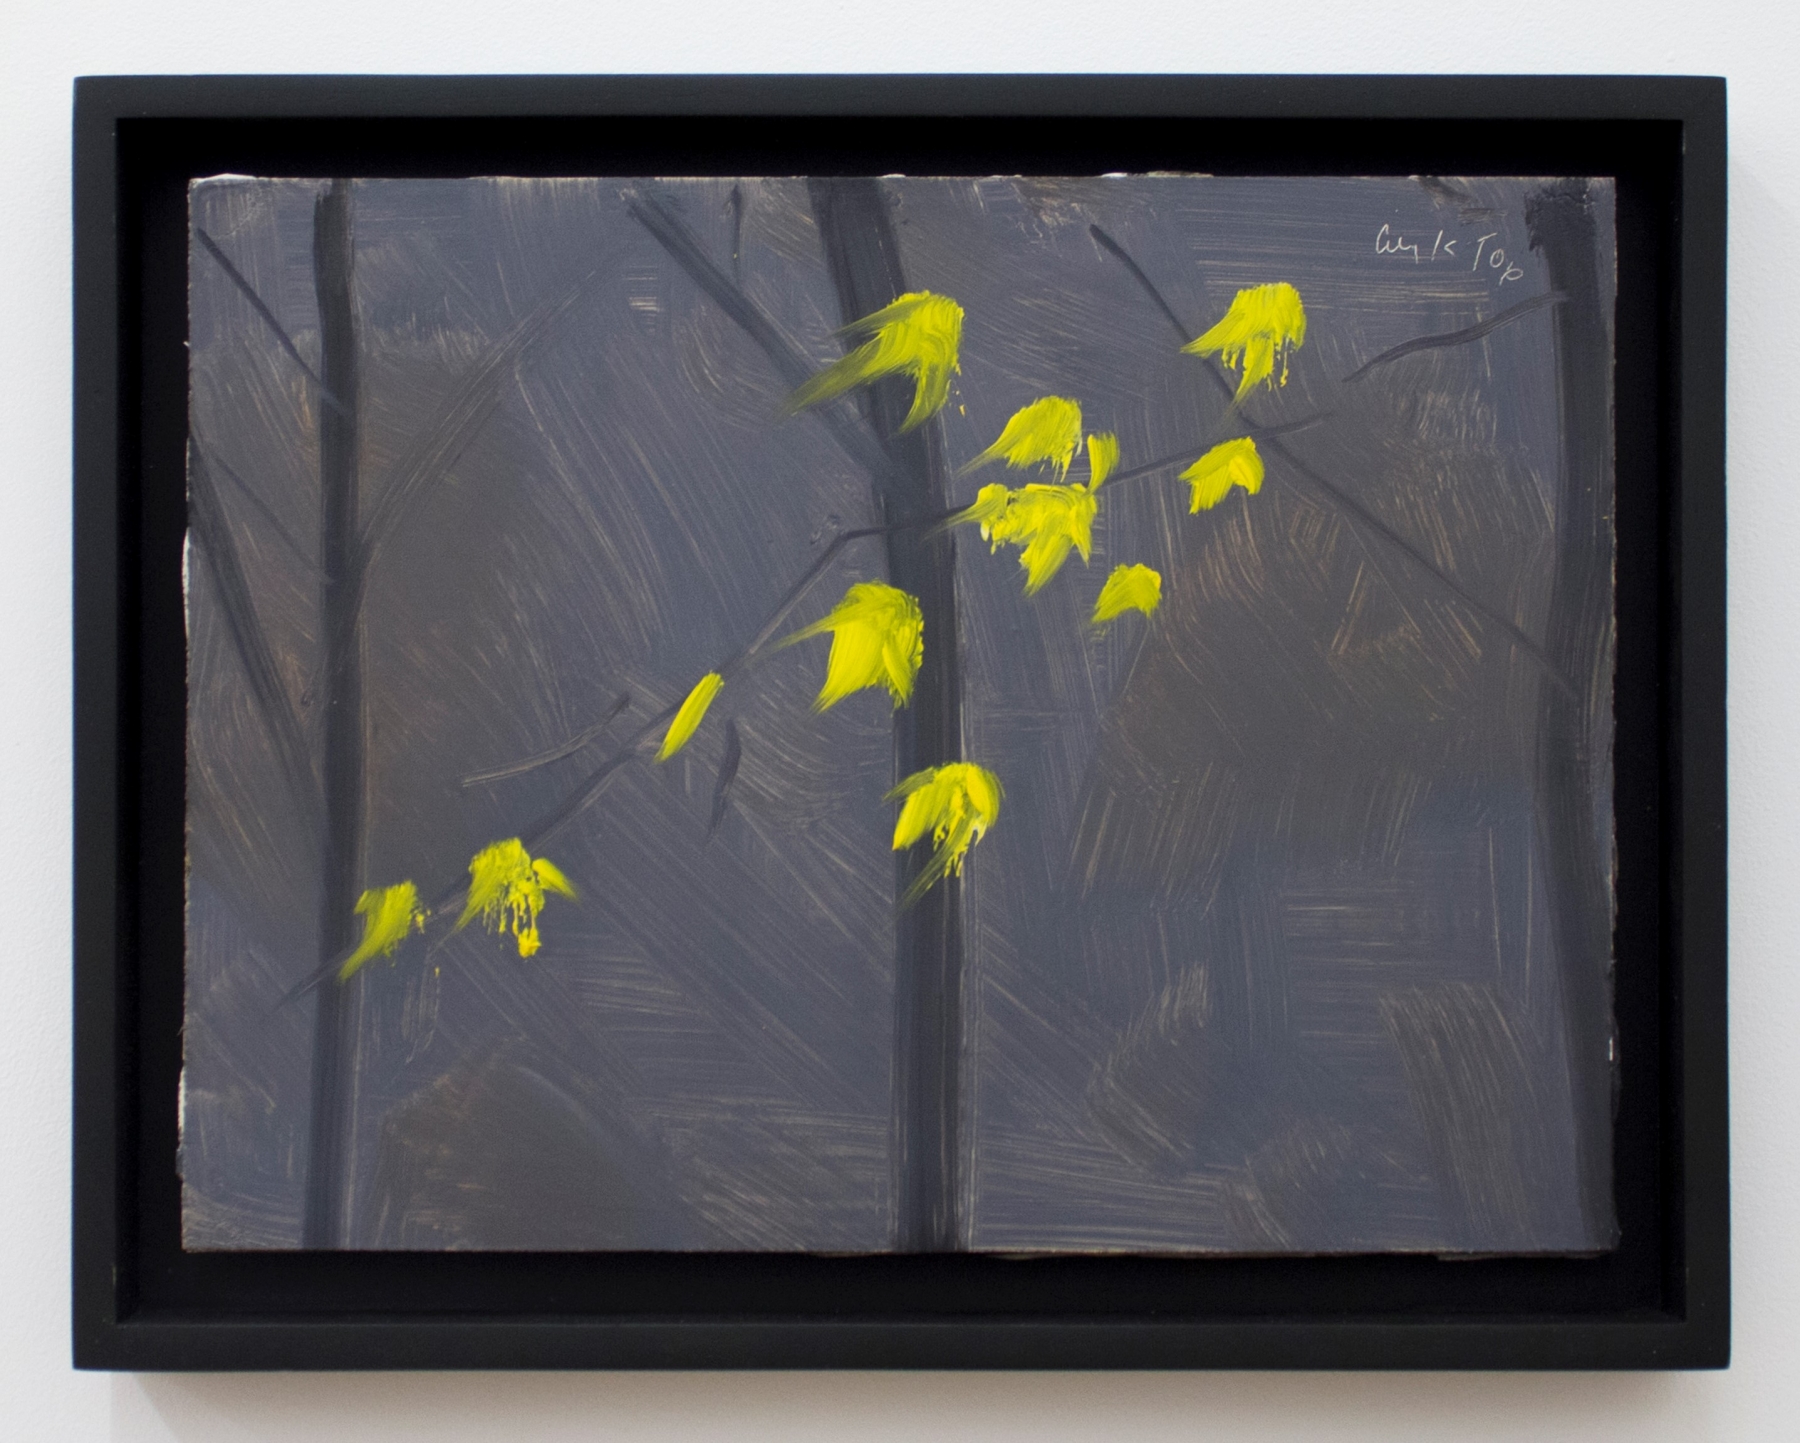 Alex Katz
Yellow Leaves 2, 2006
Oil on board
9 x 12 inches (22.9 x 30.5 cm)

Sold
Inquire
&amp;nbsp;